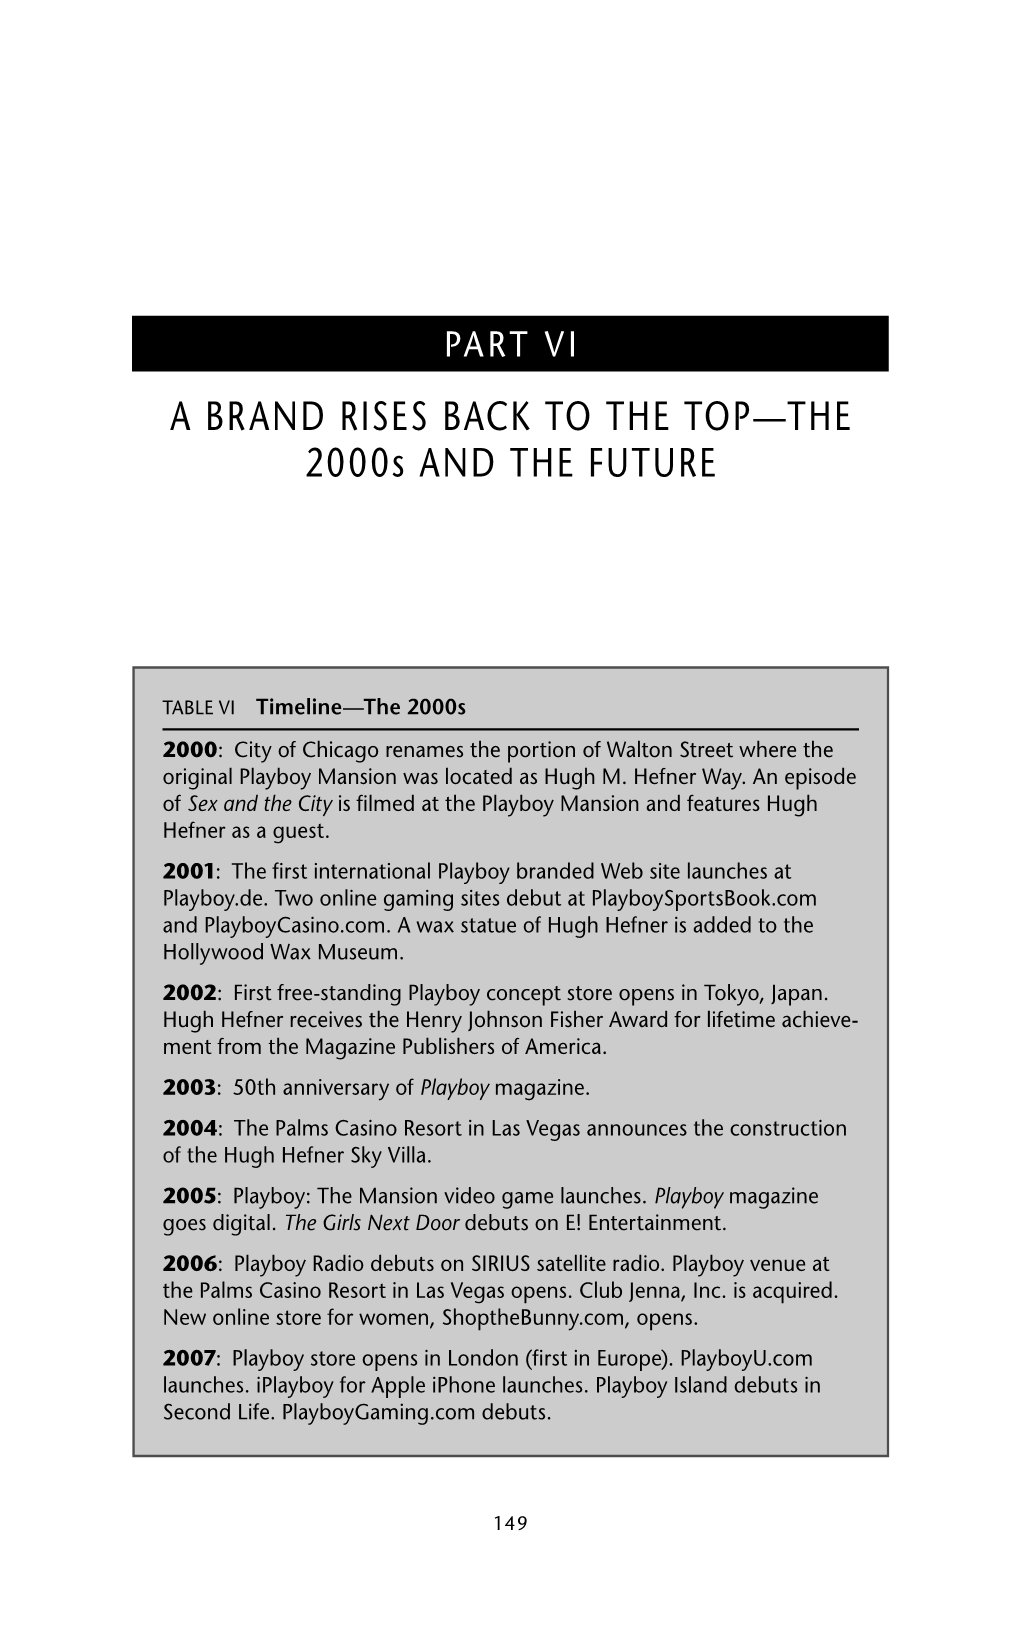 A BRAND RISES BACK to the TOP—THE 2000S and the FUTURE